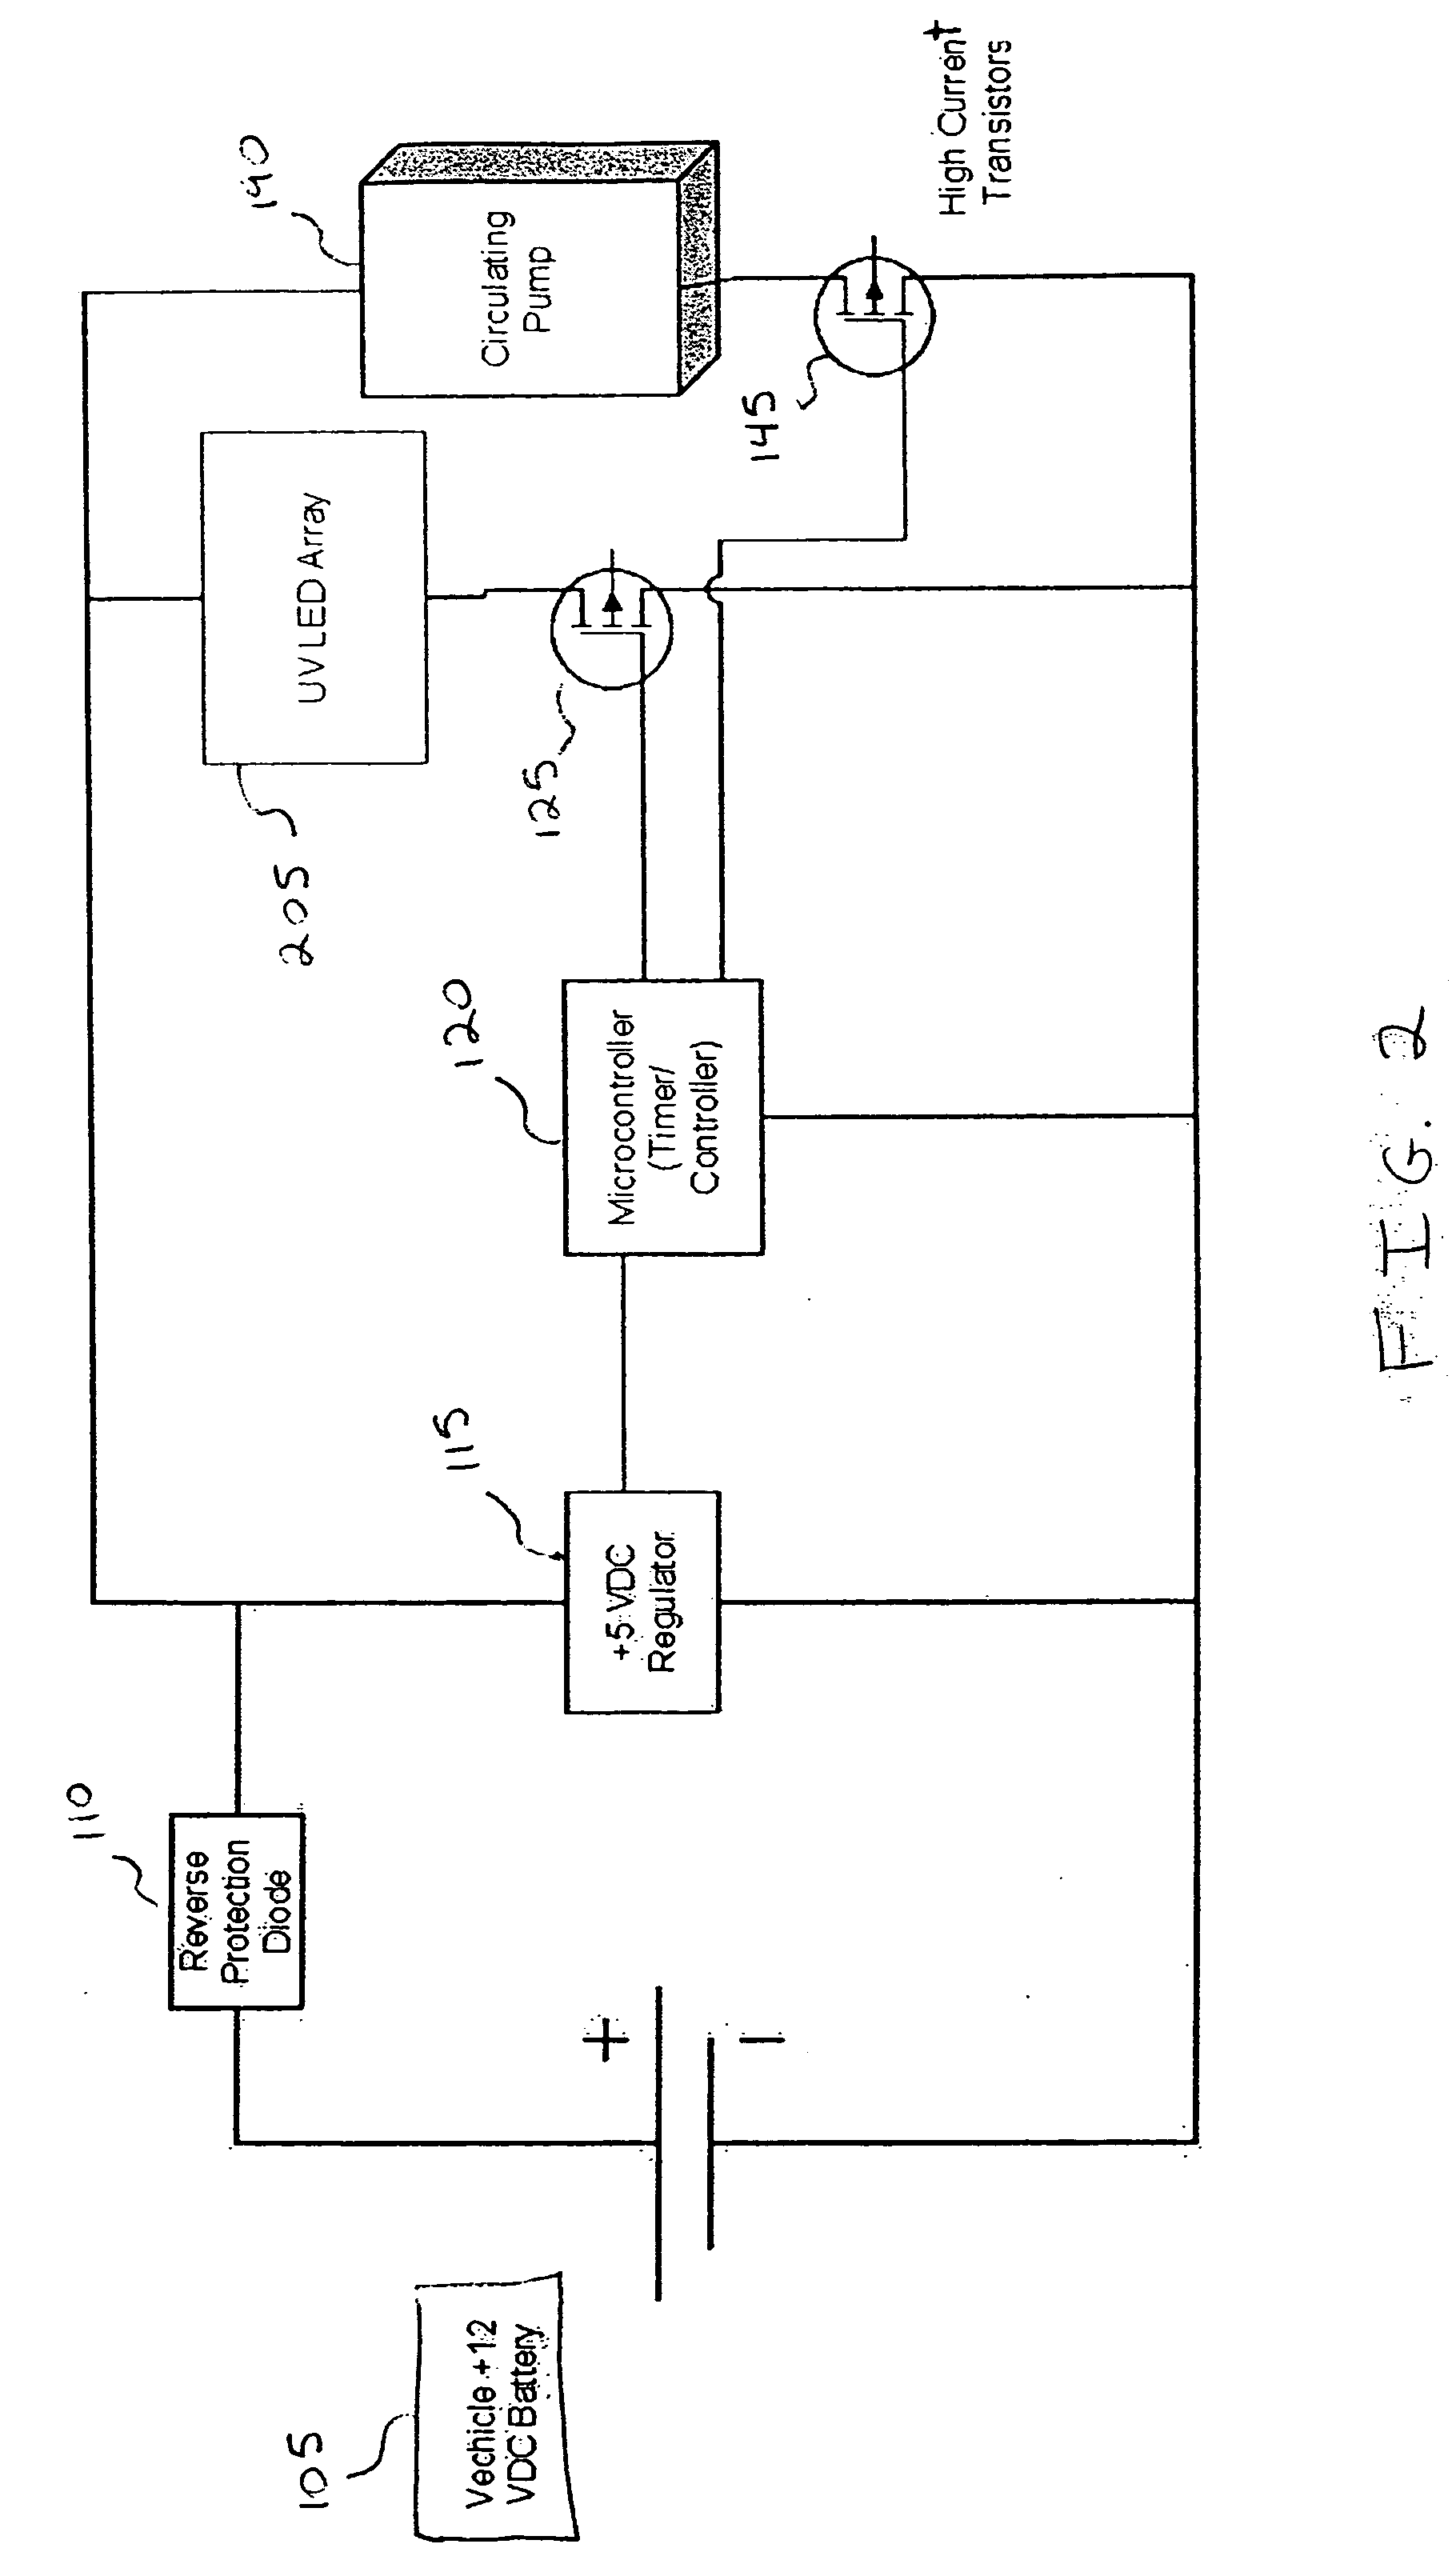 Sterilizing method, system, and device utilizing ultraviolet light emitting diodes powered by direct current or solar power in a recreational vehicle or marine environment